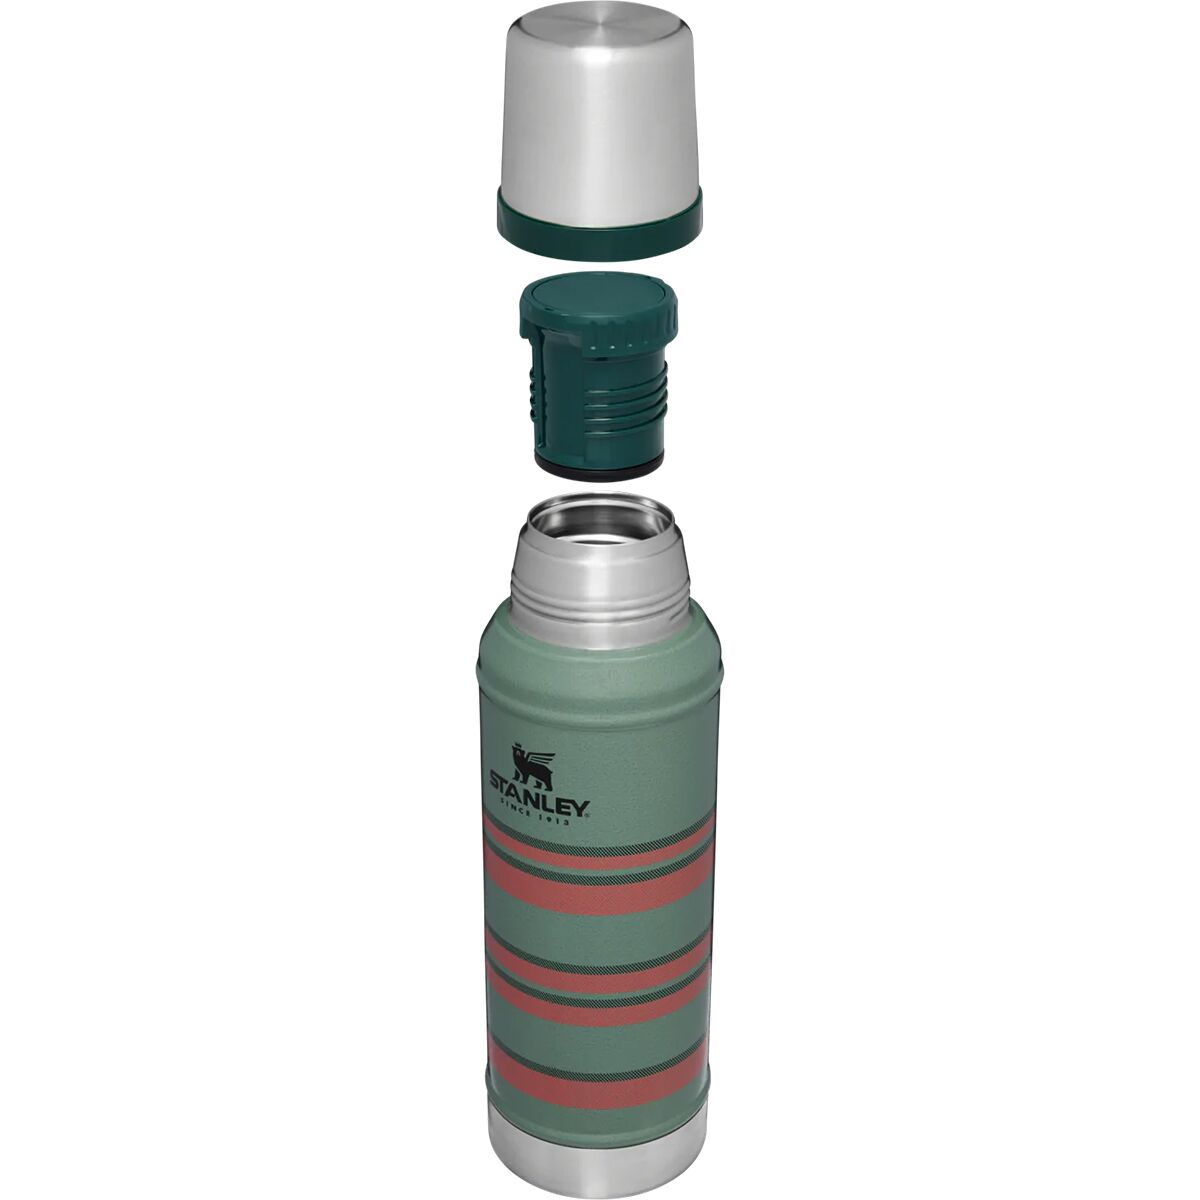 Seaside Surf x Stanley Vacuum Insulated 1.5 Qt Classic Thermos - Hammertone  Green